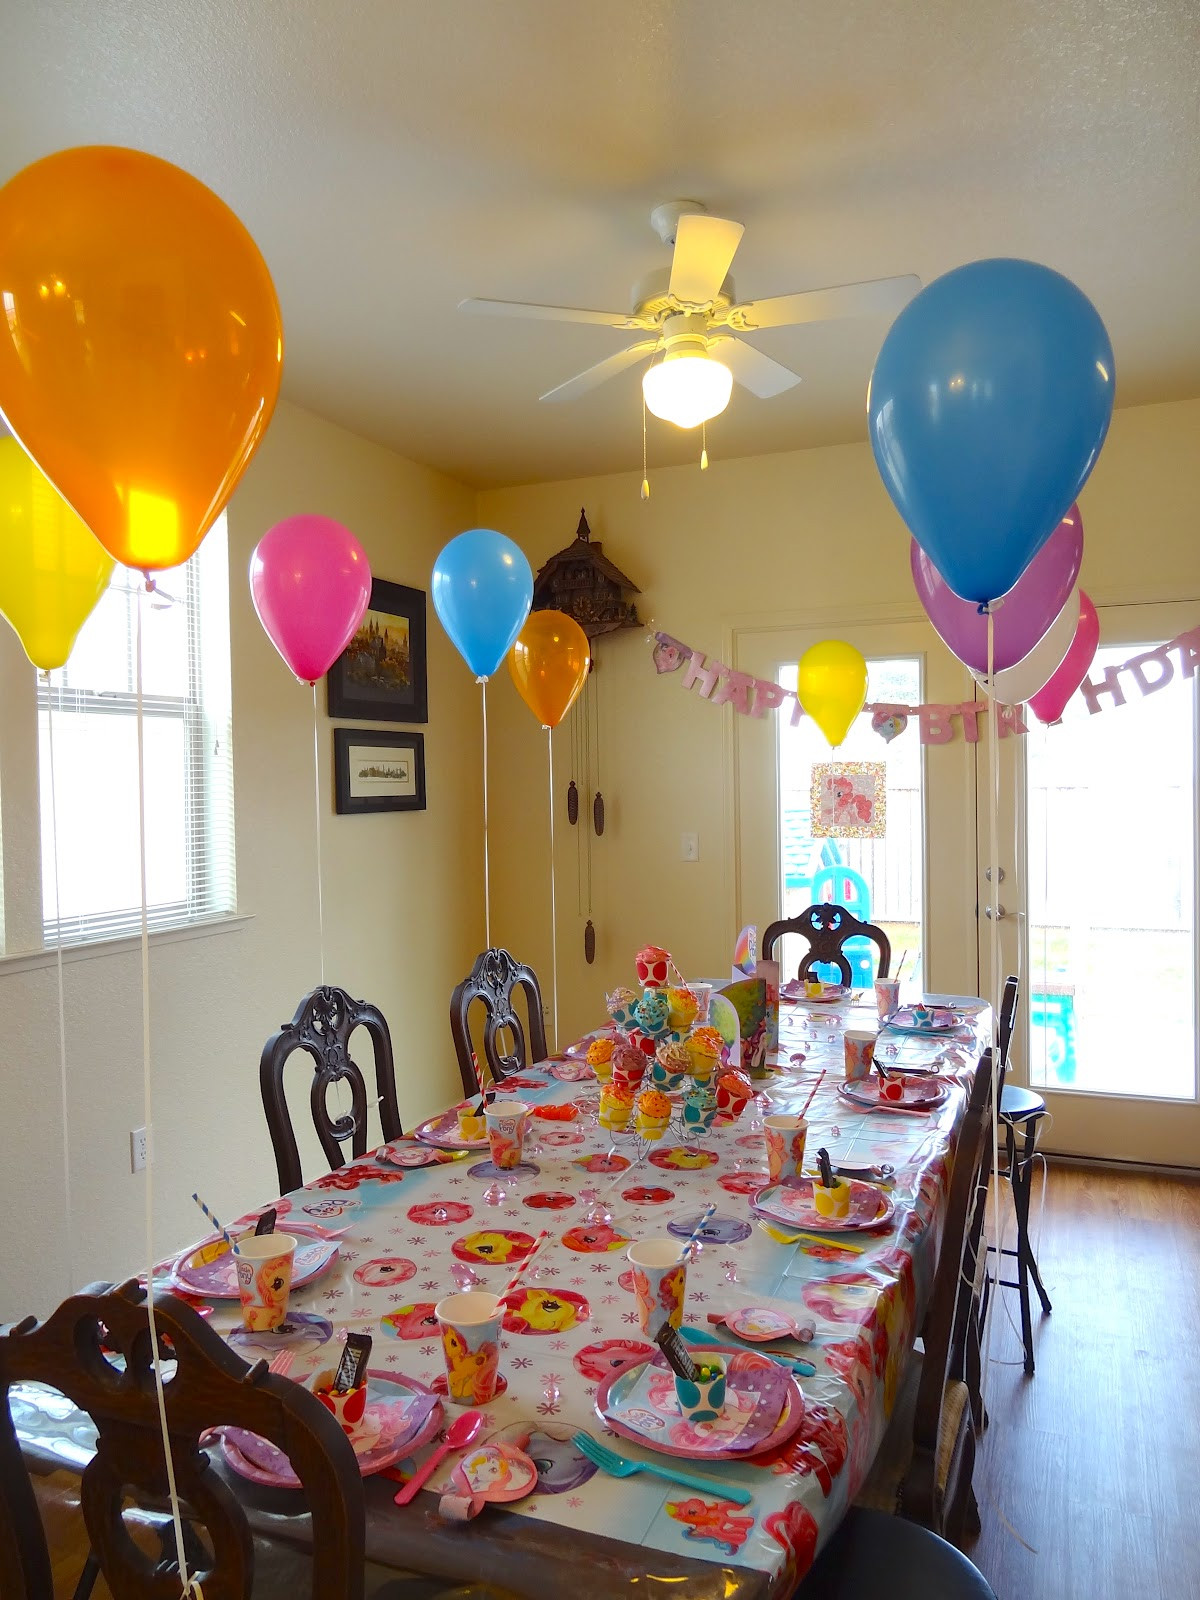 4 Year Old Little Girl Birthday Party Ideas
 Wel e to the Krazy Kingdom Taya s 5th Birthday Party